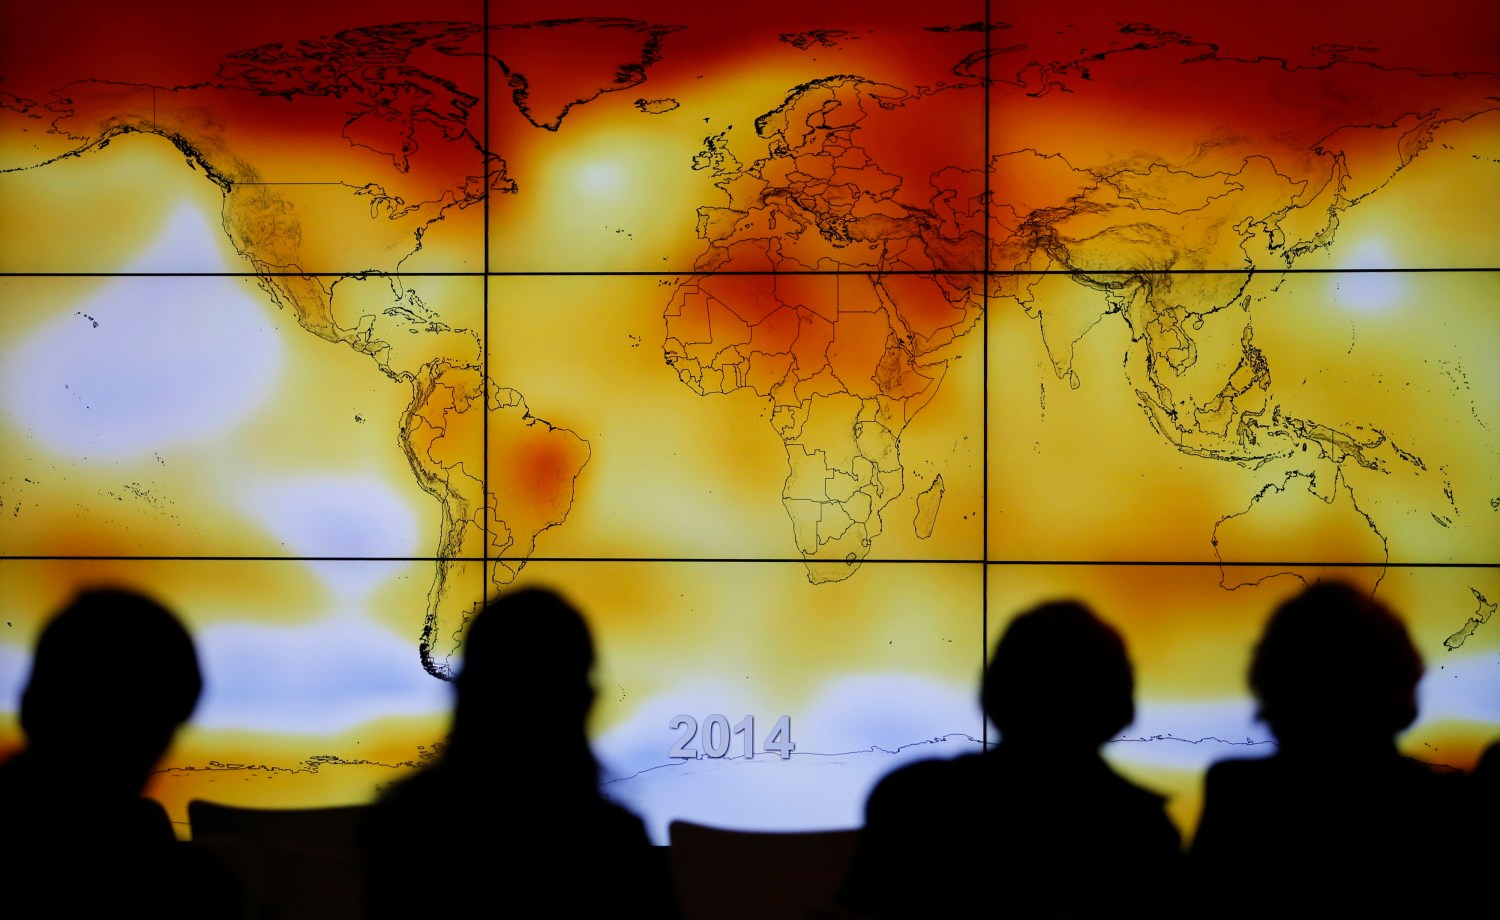 Participants are seen in silhouette as they look at a screen showing a world map with climate anomalies during the World Climate Change Conference 2015 (COP21) at Le Bourget, near Paris, France, December 8, 2015. REUTERS/Stephane Mahe TPX IMAGES OF THE DAY - RTX1XPHY